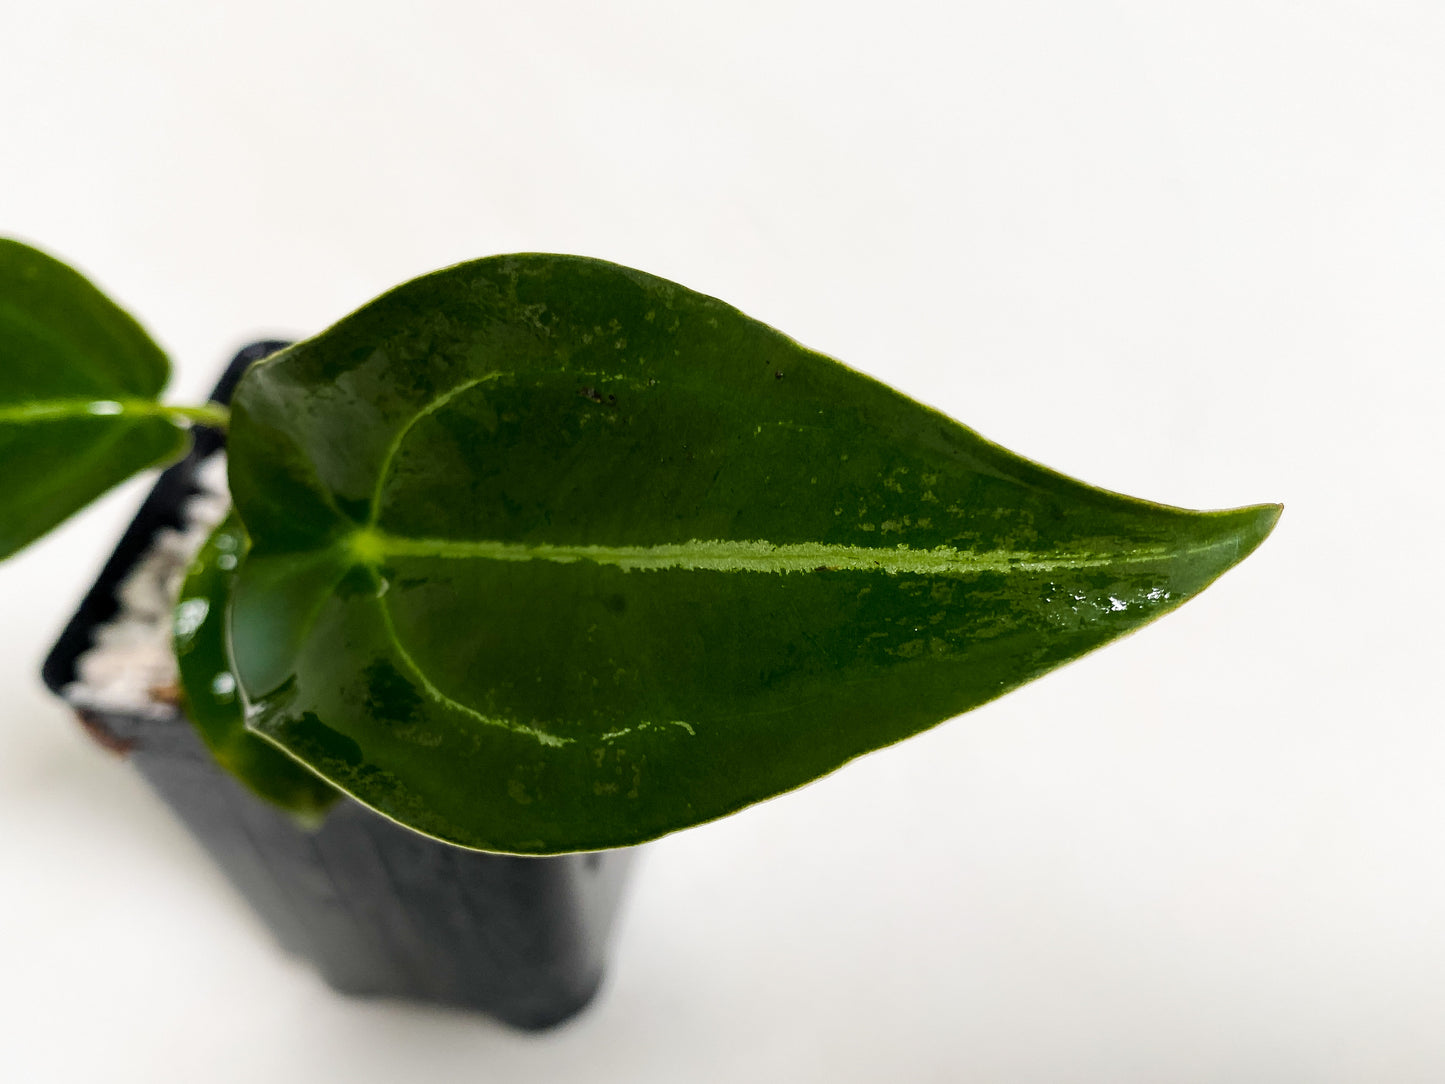 Anthurium forgetii - 3 leaves rooted